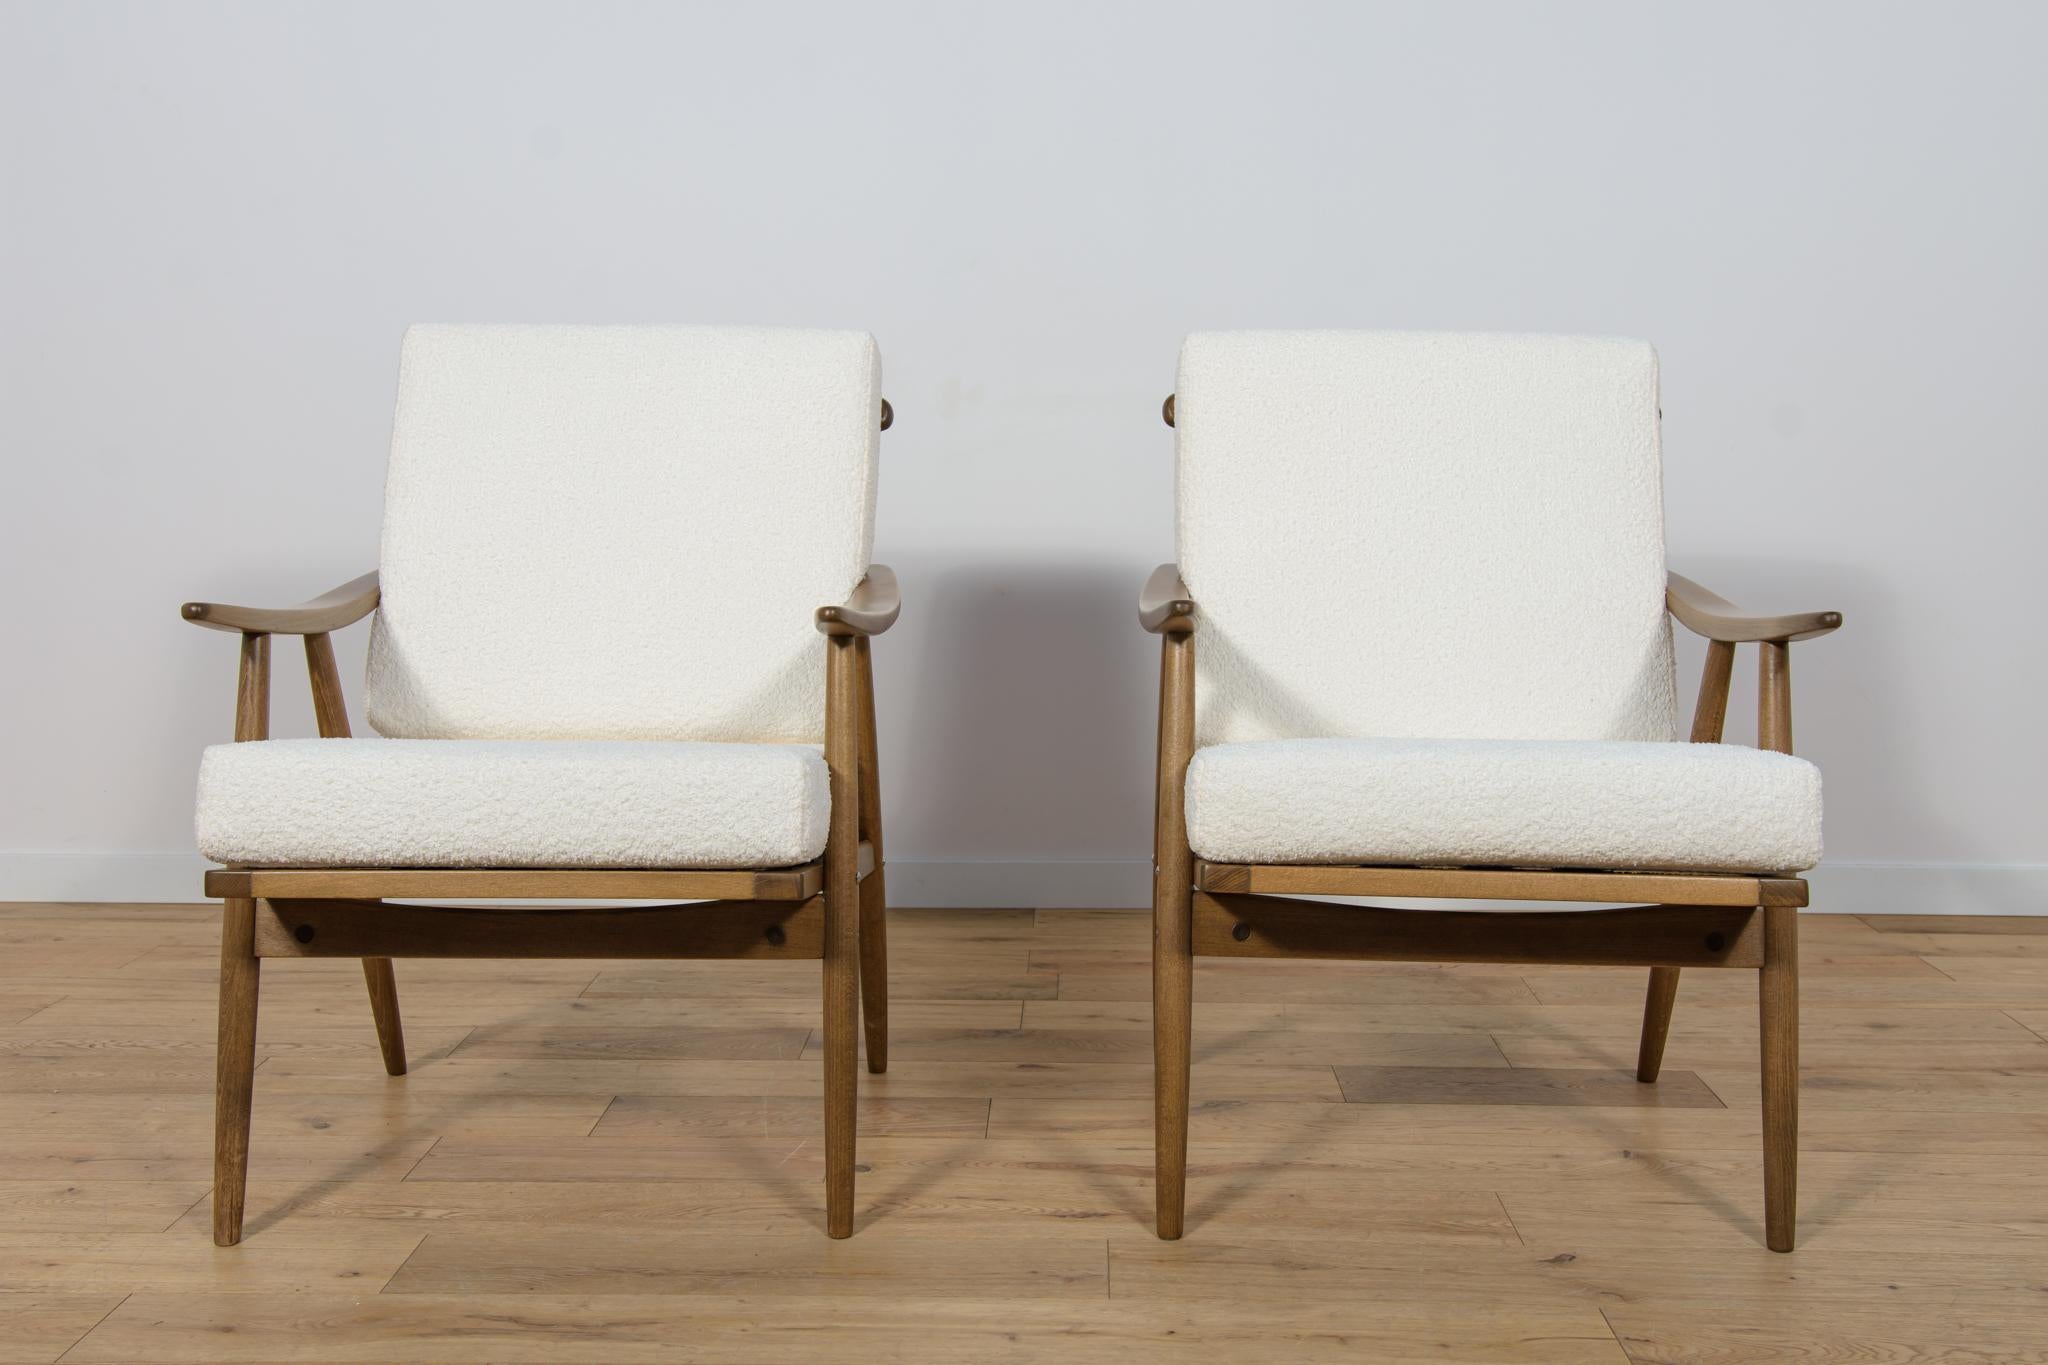 This pair armchairs was produced by the Czechoslovak company TON in the 1960s. The beech elements have been cleaned from the old surface and painted in a walnut stain and finished with a strong semi matt lacquer. The pillows have been replaced with